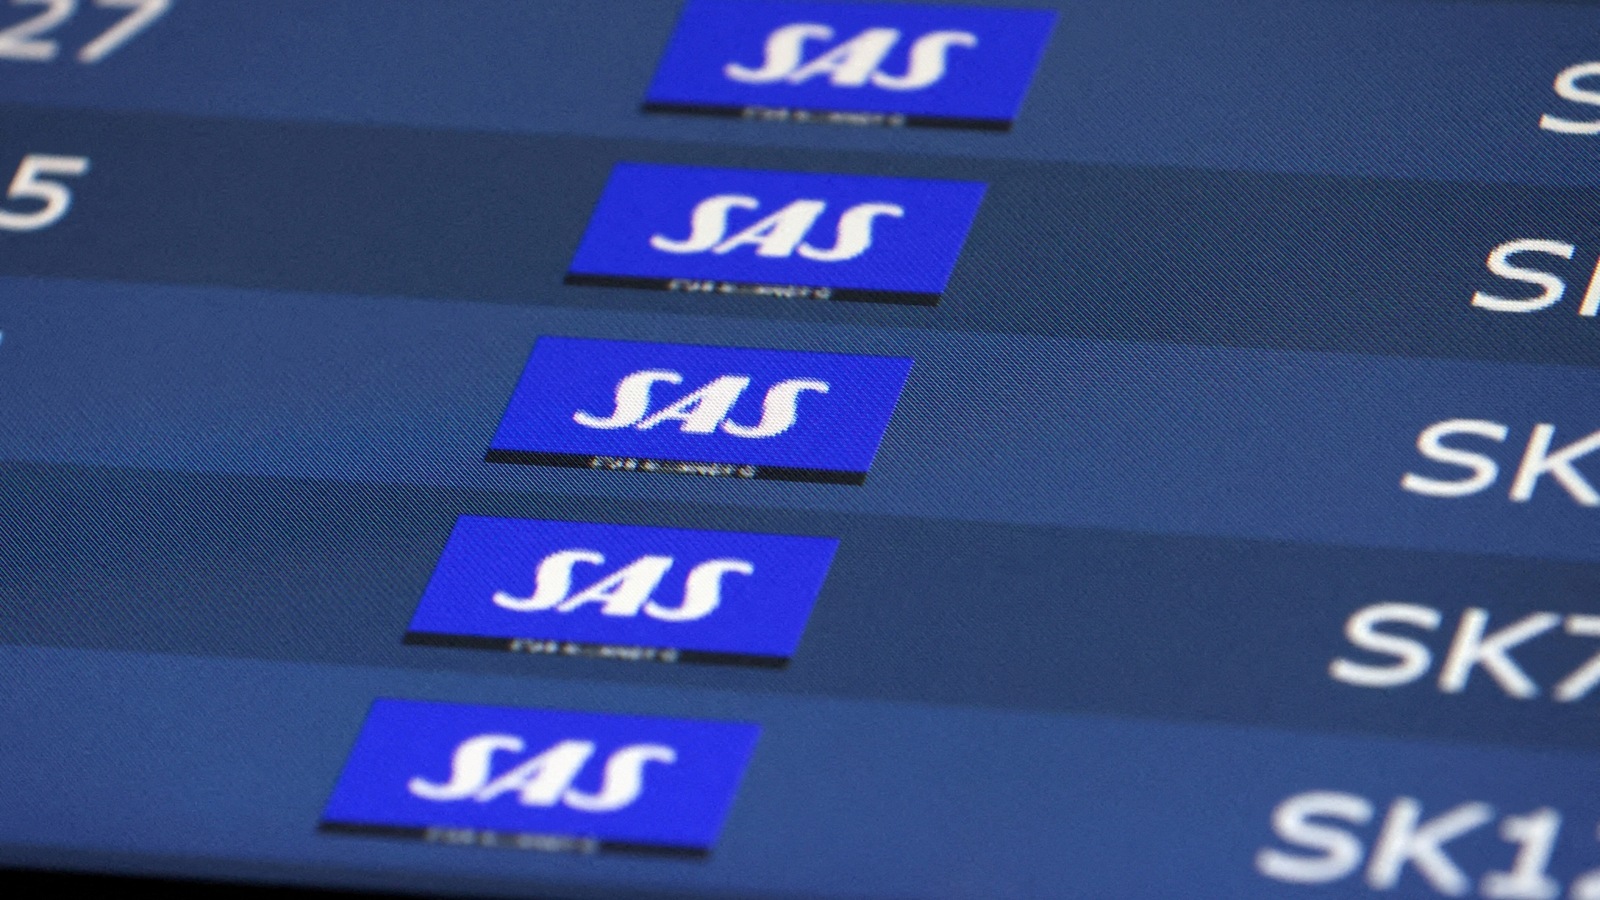 Scandinavian airline reaches deal over 15-day strike costing $12 million per day